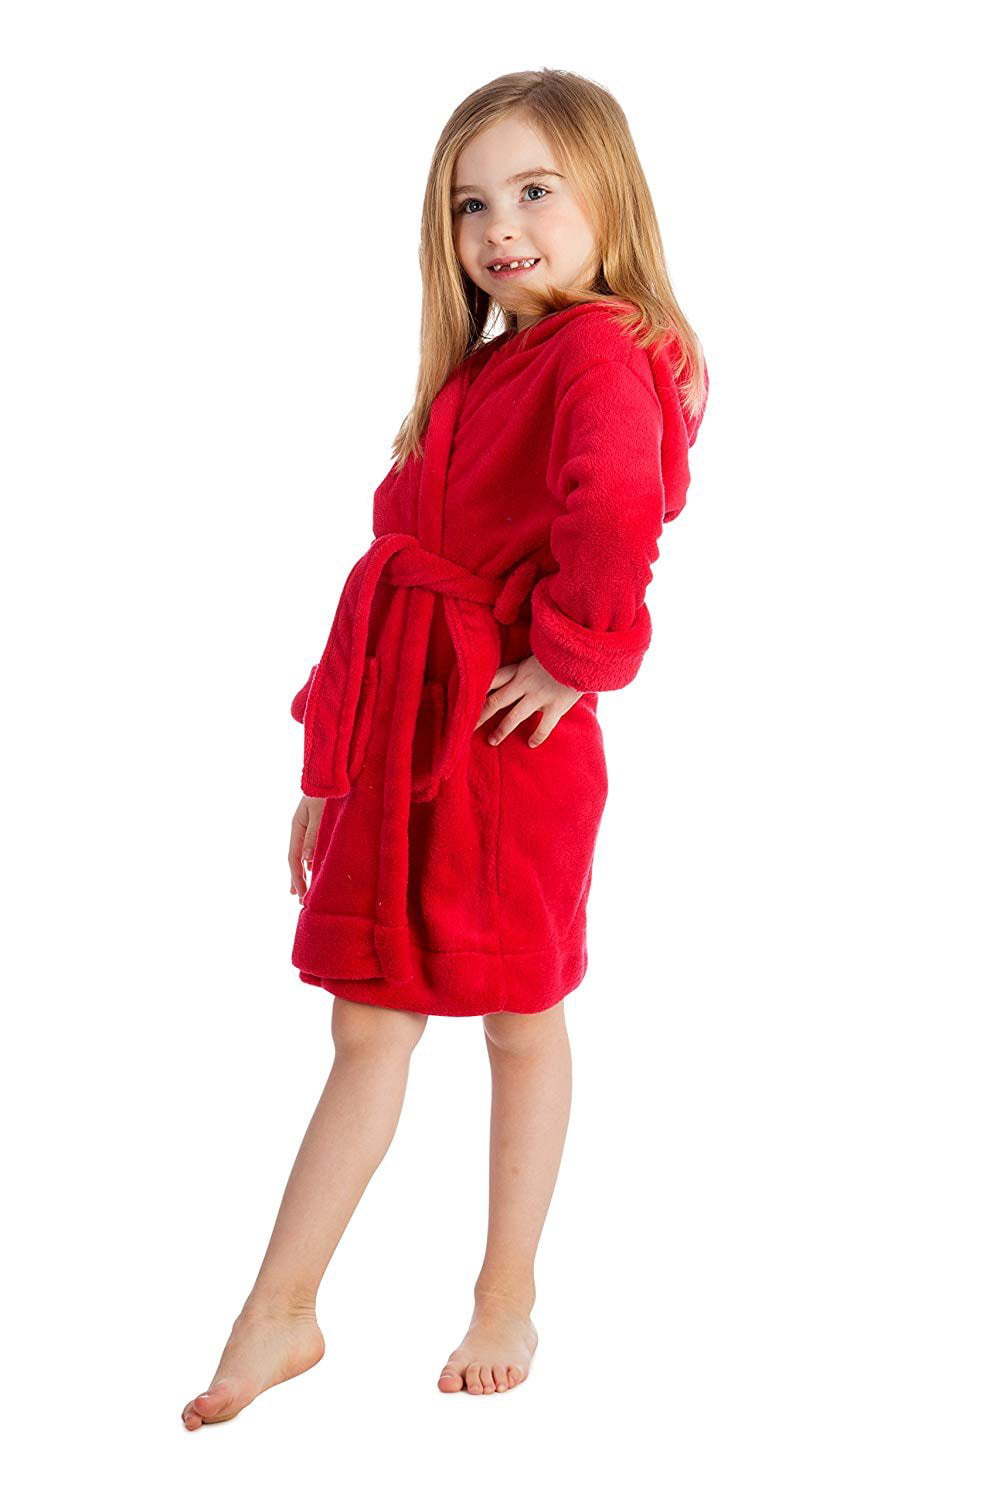 Kids Dressing Gowns Plain Solid Colors Super Soft Fleece Snuggle Nightwear Sleepwear Hooded Robes for Boys and Girls 